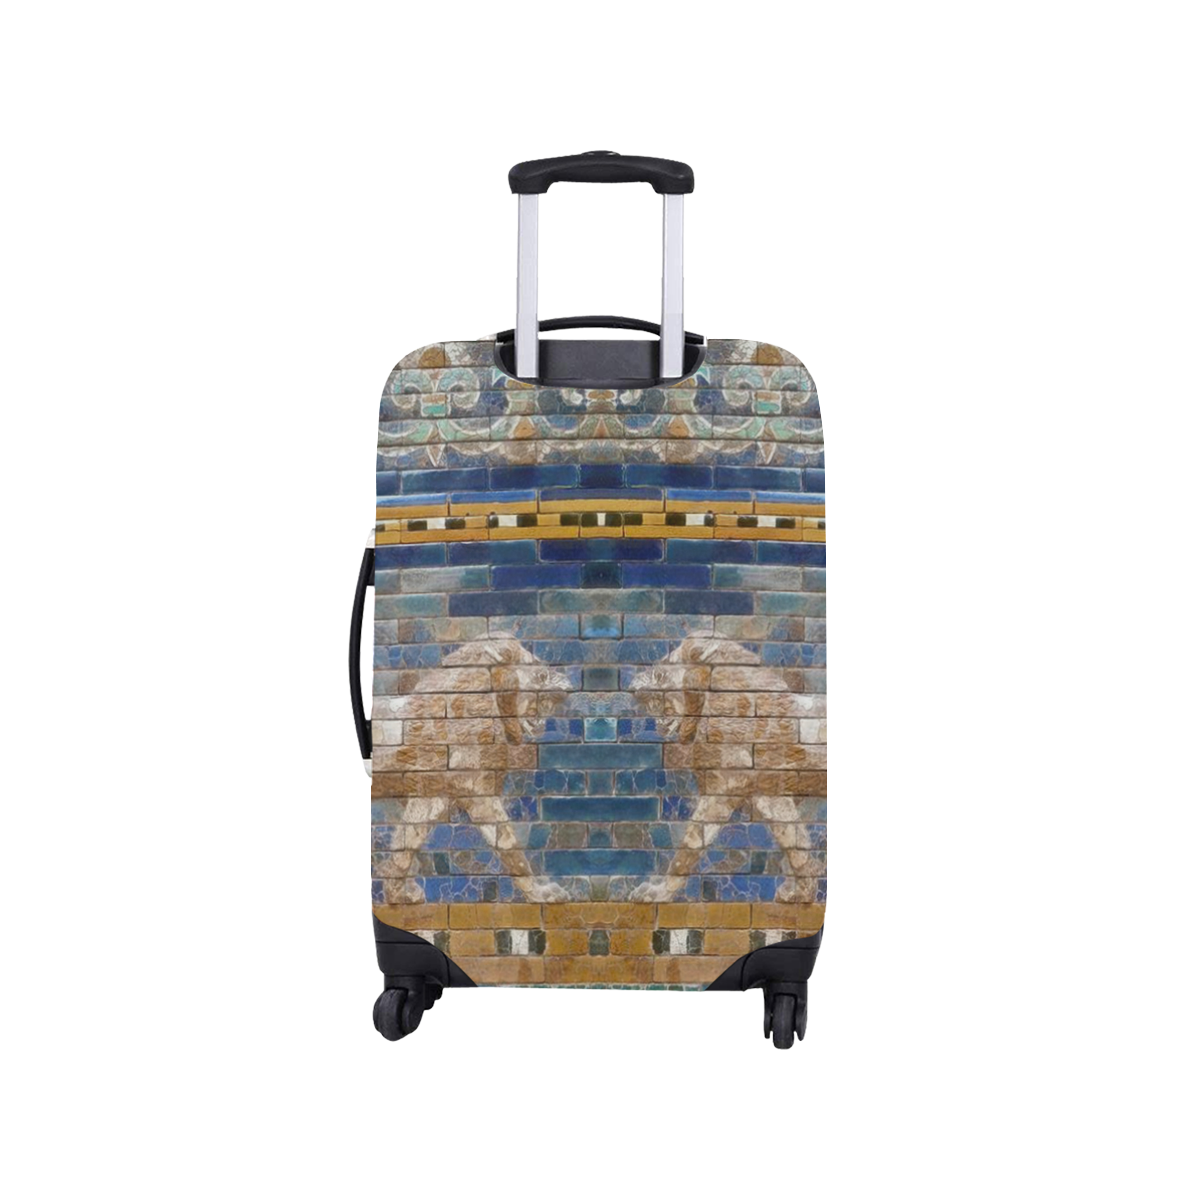 Lions of Babylon Luggage Cover/Small 18"-21"